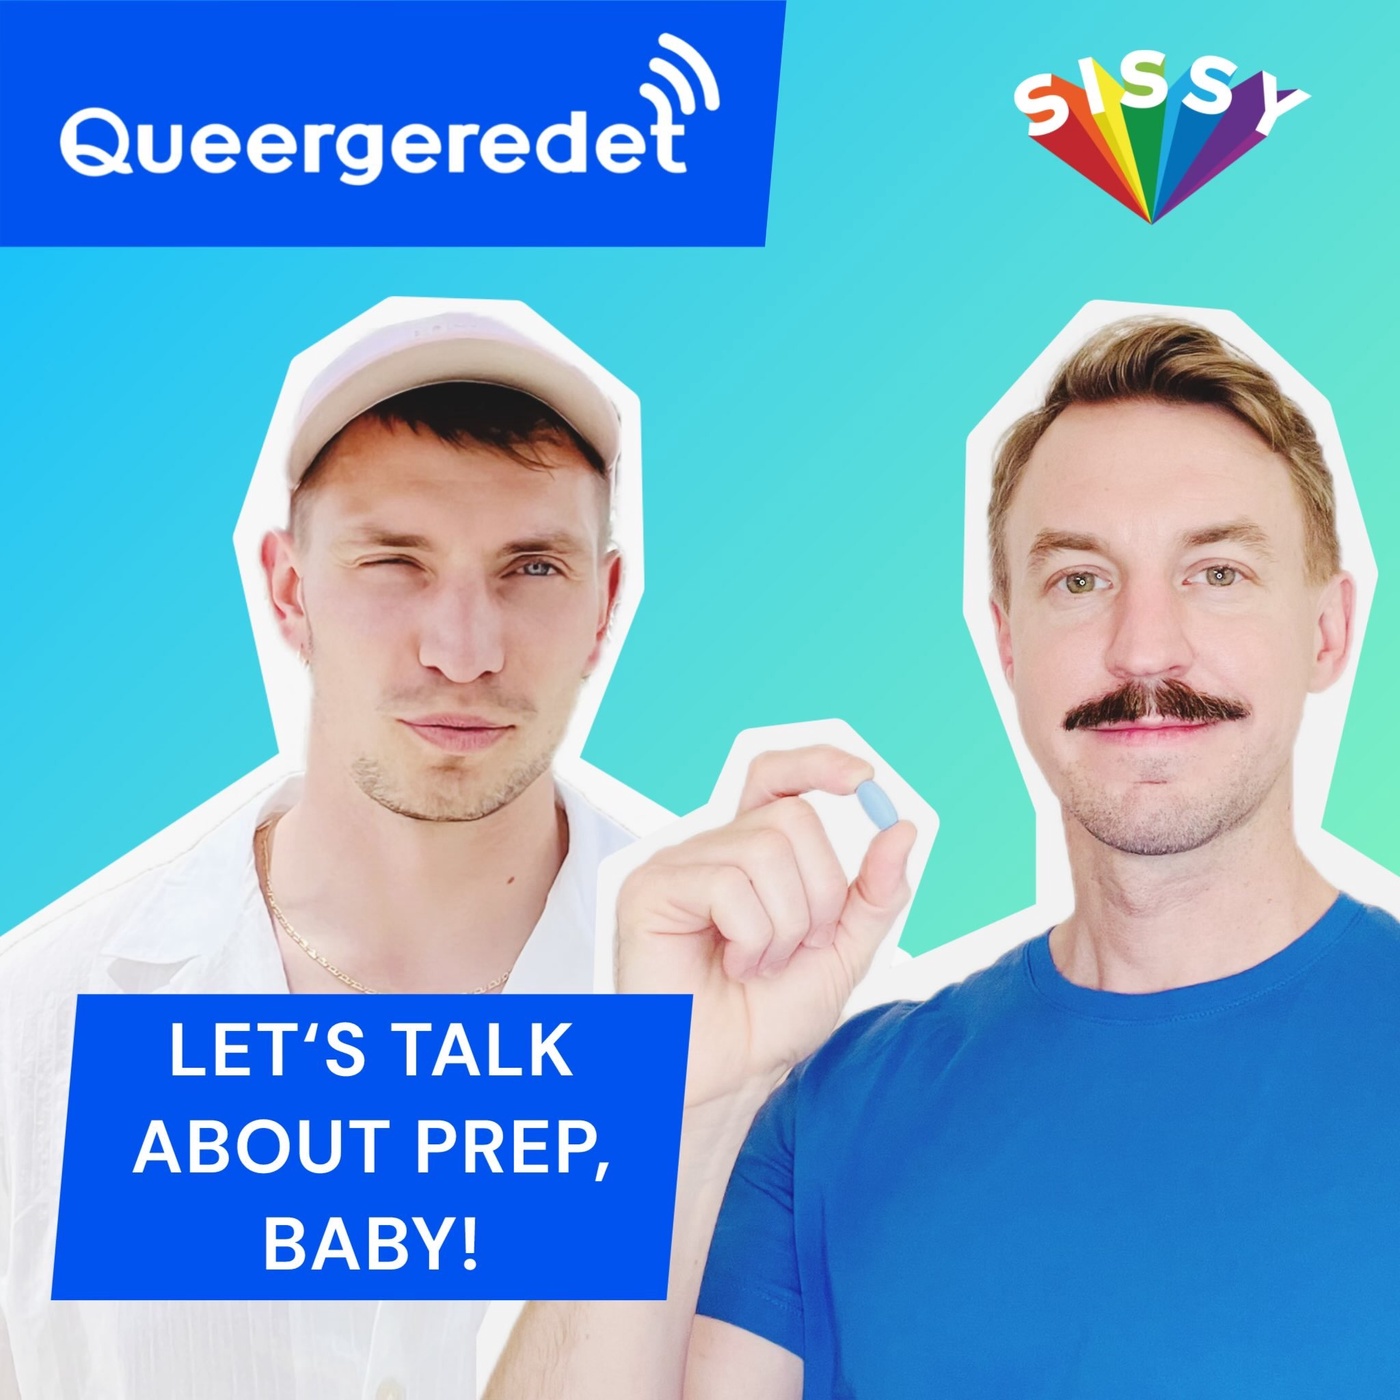 10: Let's Talk About PrEP, Baby!